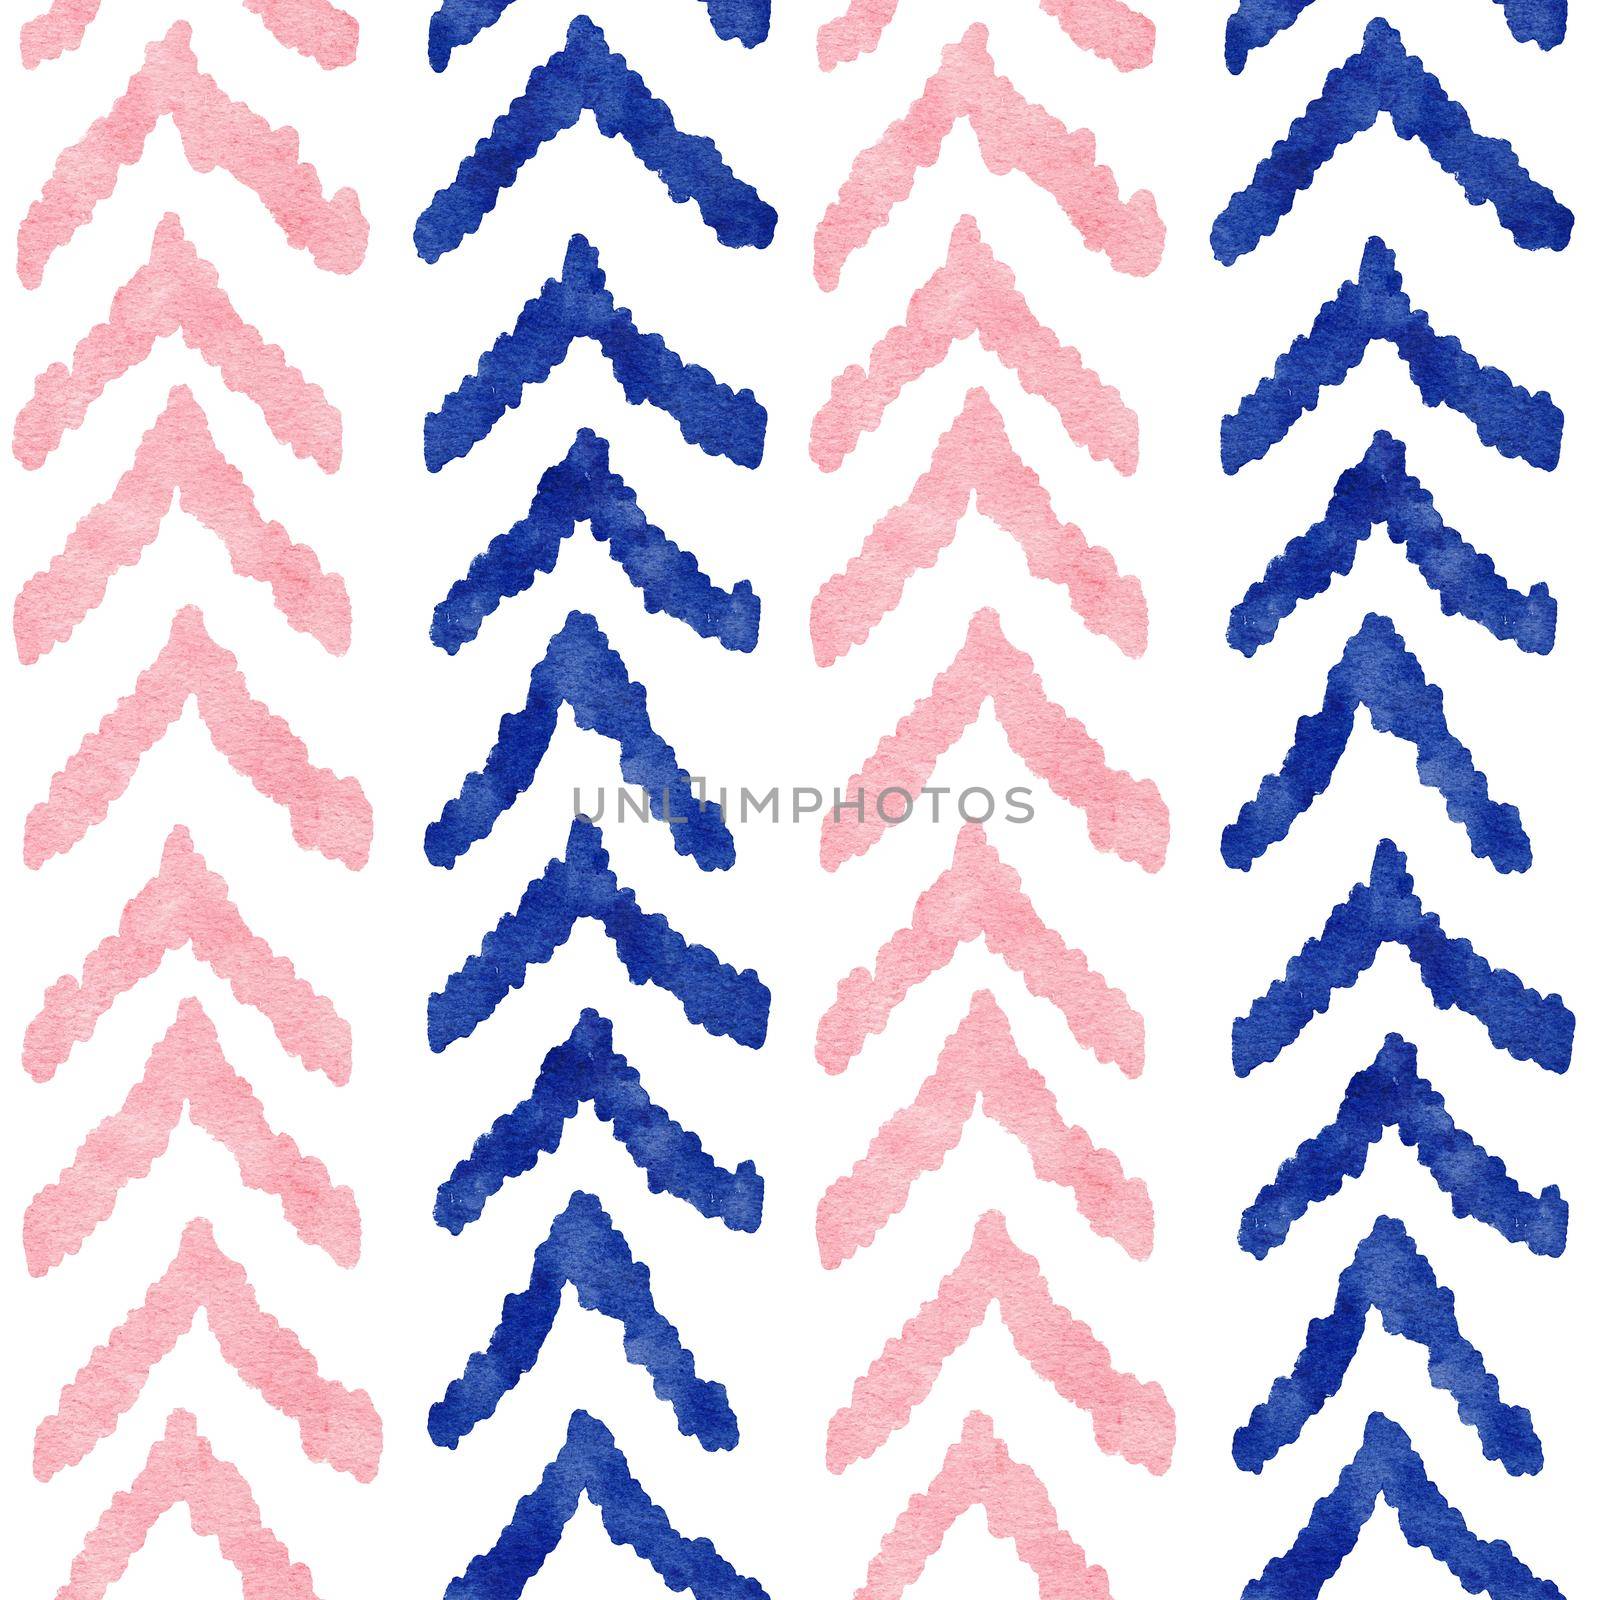 Hand drawn watercolor seamless pattern with navy blush boho elements. Bohemian blue pink fabric print, indigo rose geometric abstract shapes, ethnic design. For wedding invitation, gender reveal cards decor wallpaper